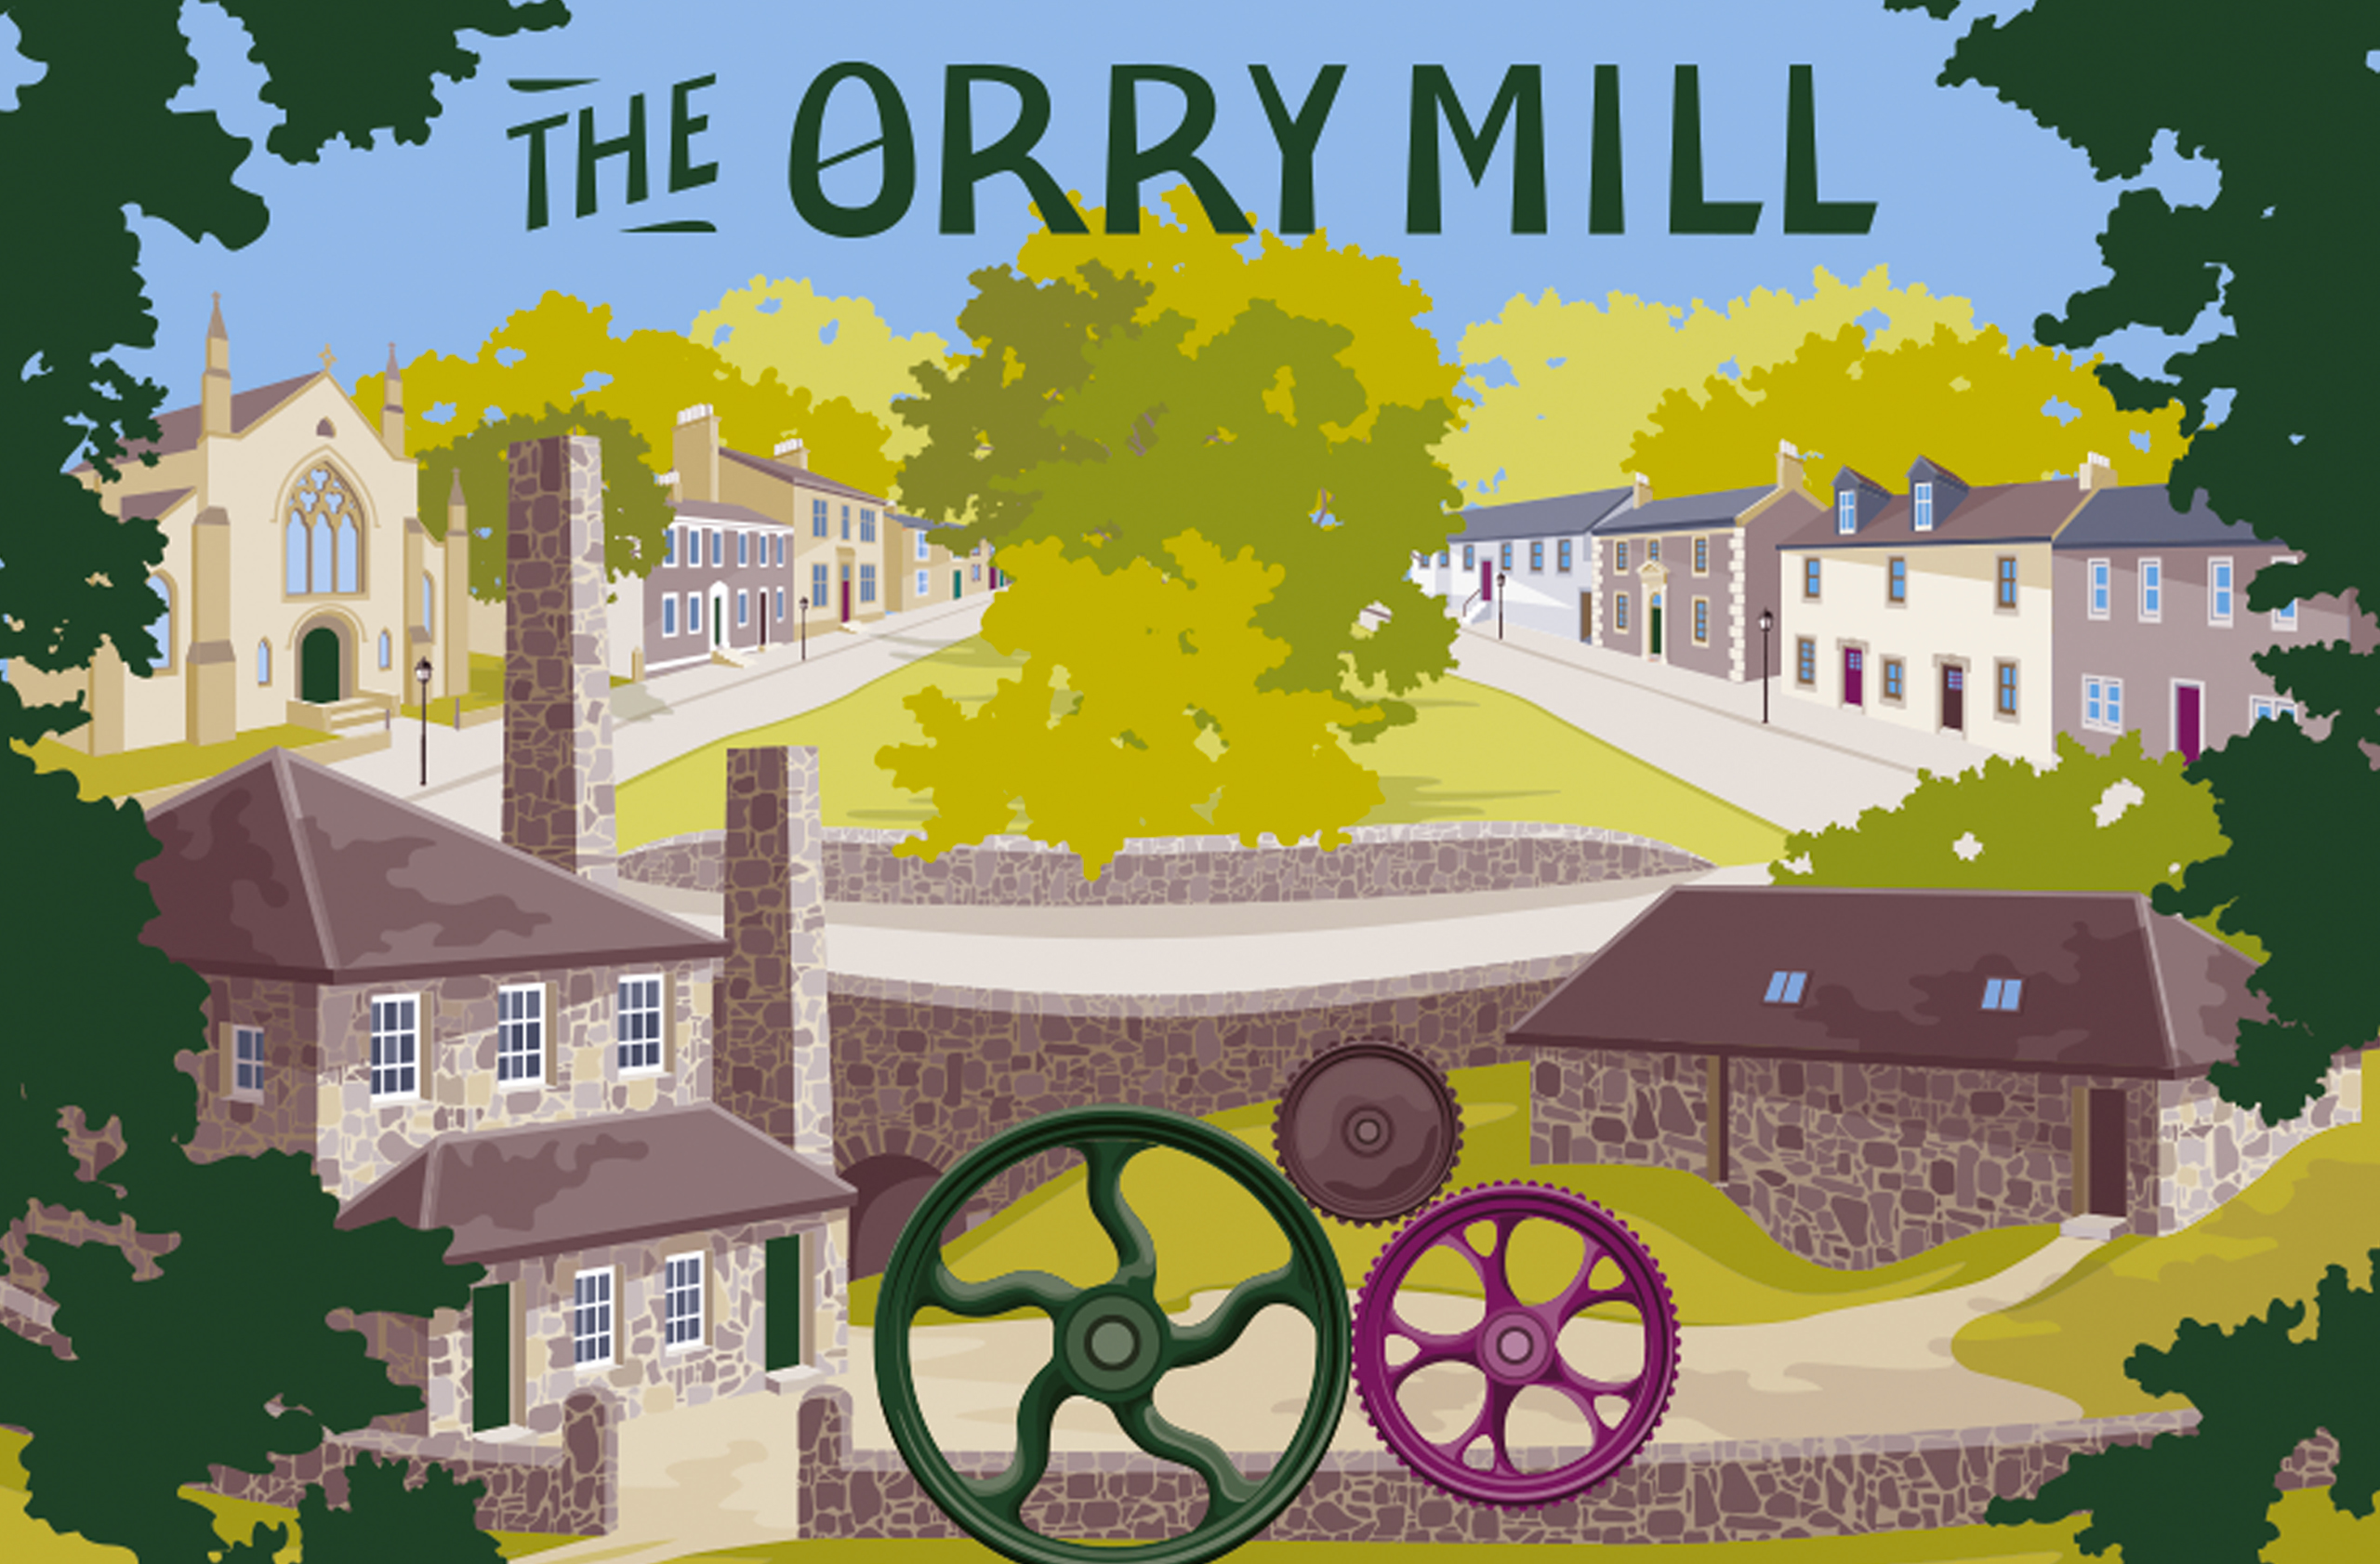 The Orry Mill Illustration